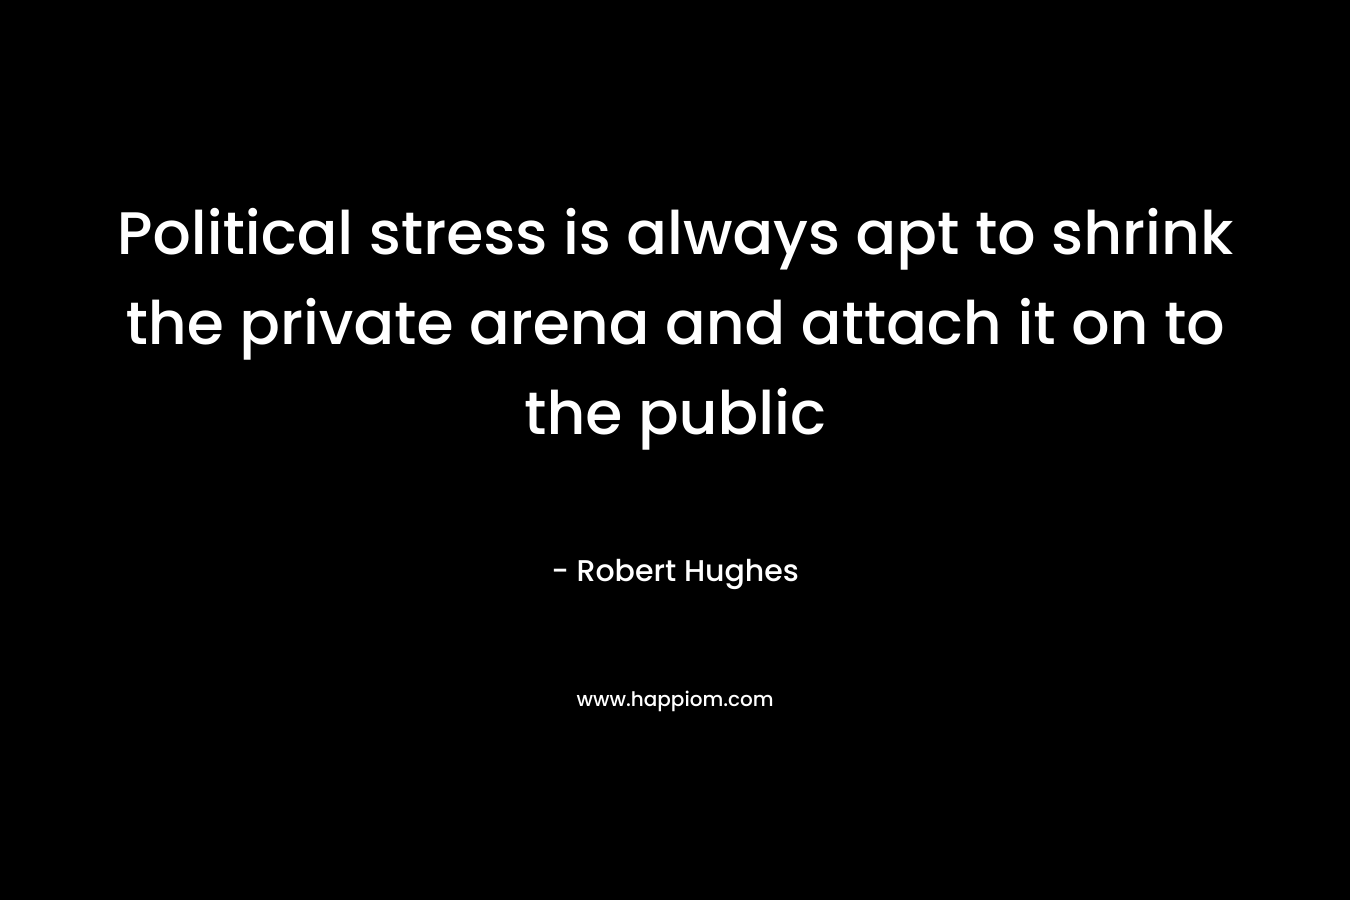 Political stress is always apt to shrink the private arena and attach it on to the public